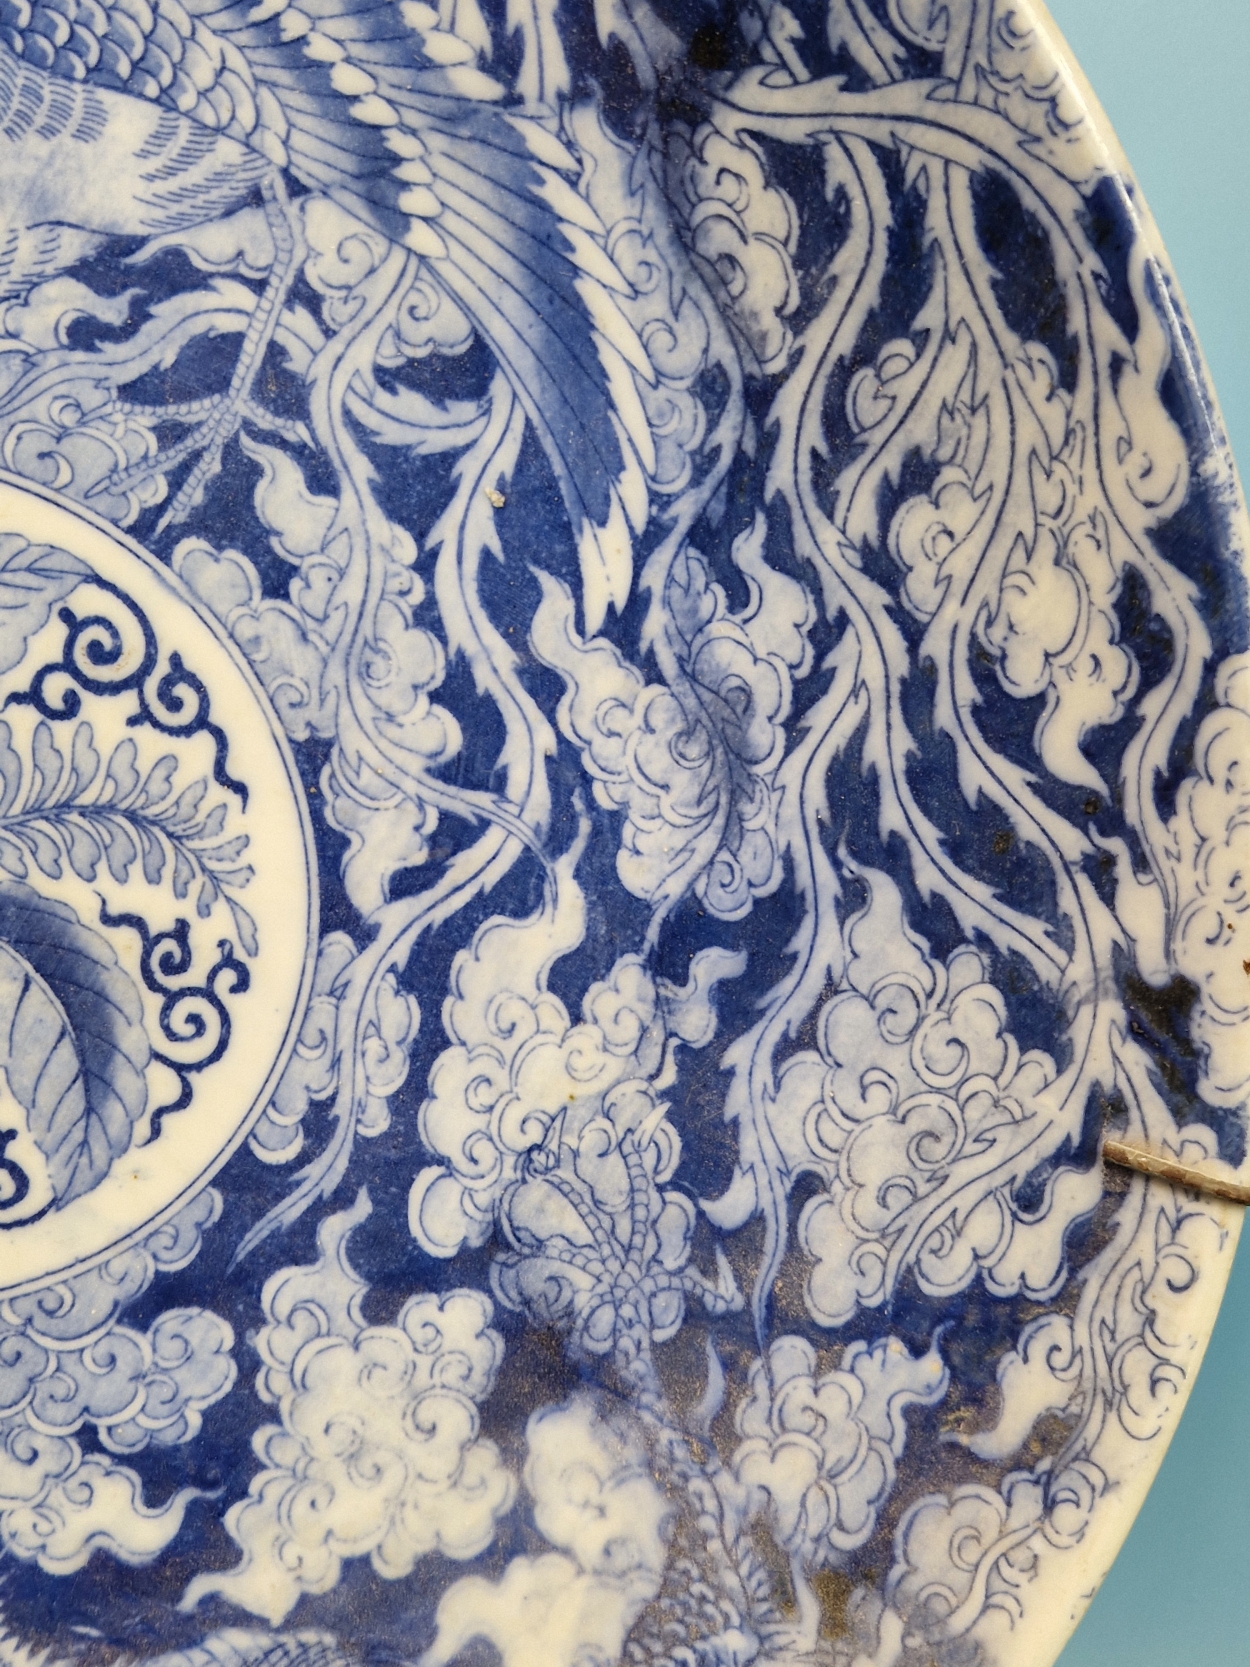 A PAIR OF JAPANESE BLUE AND WHITE CHARGERS PRINTED WITH DRAGONS AND PHOENIX ENCLOSING ROSETTES. Dia. - Image 10 of 11